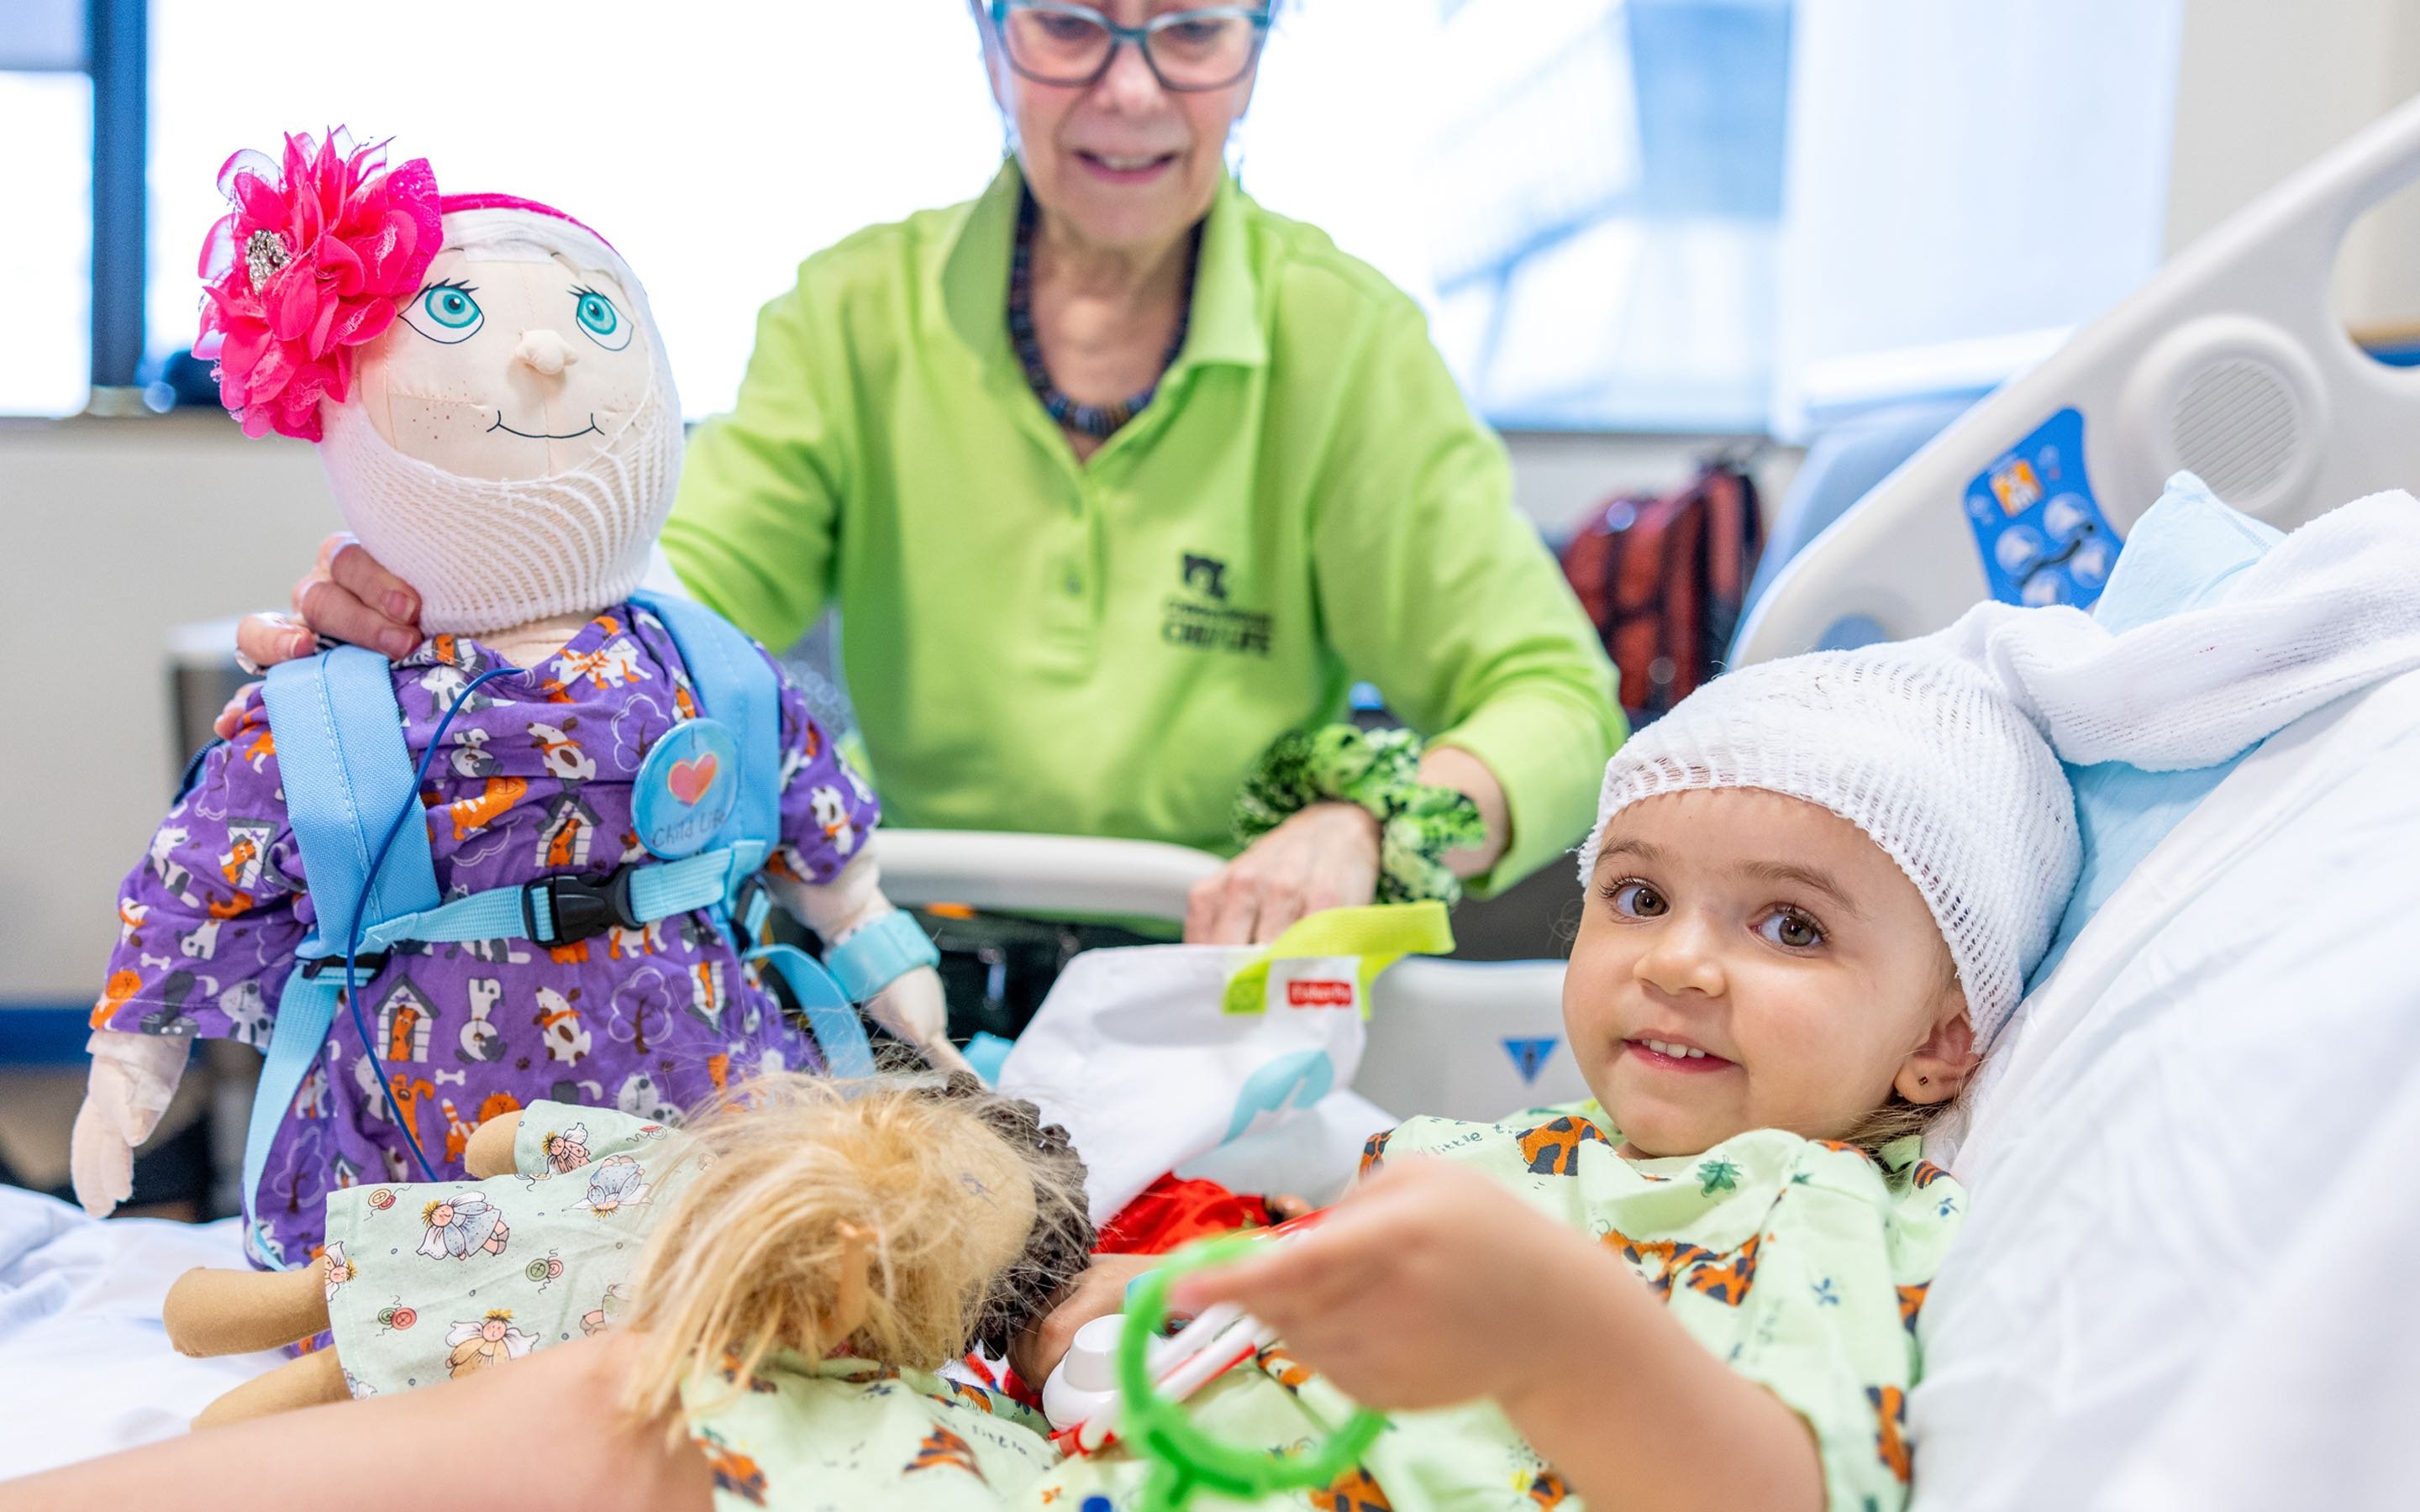 A young cancer and blood disorders patient is attended to by a health professional holding a doll.